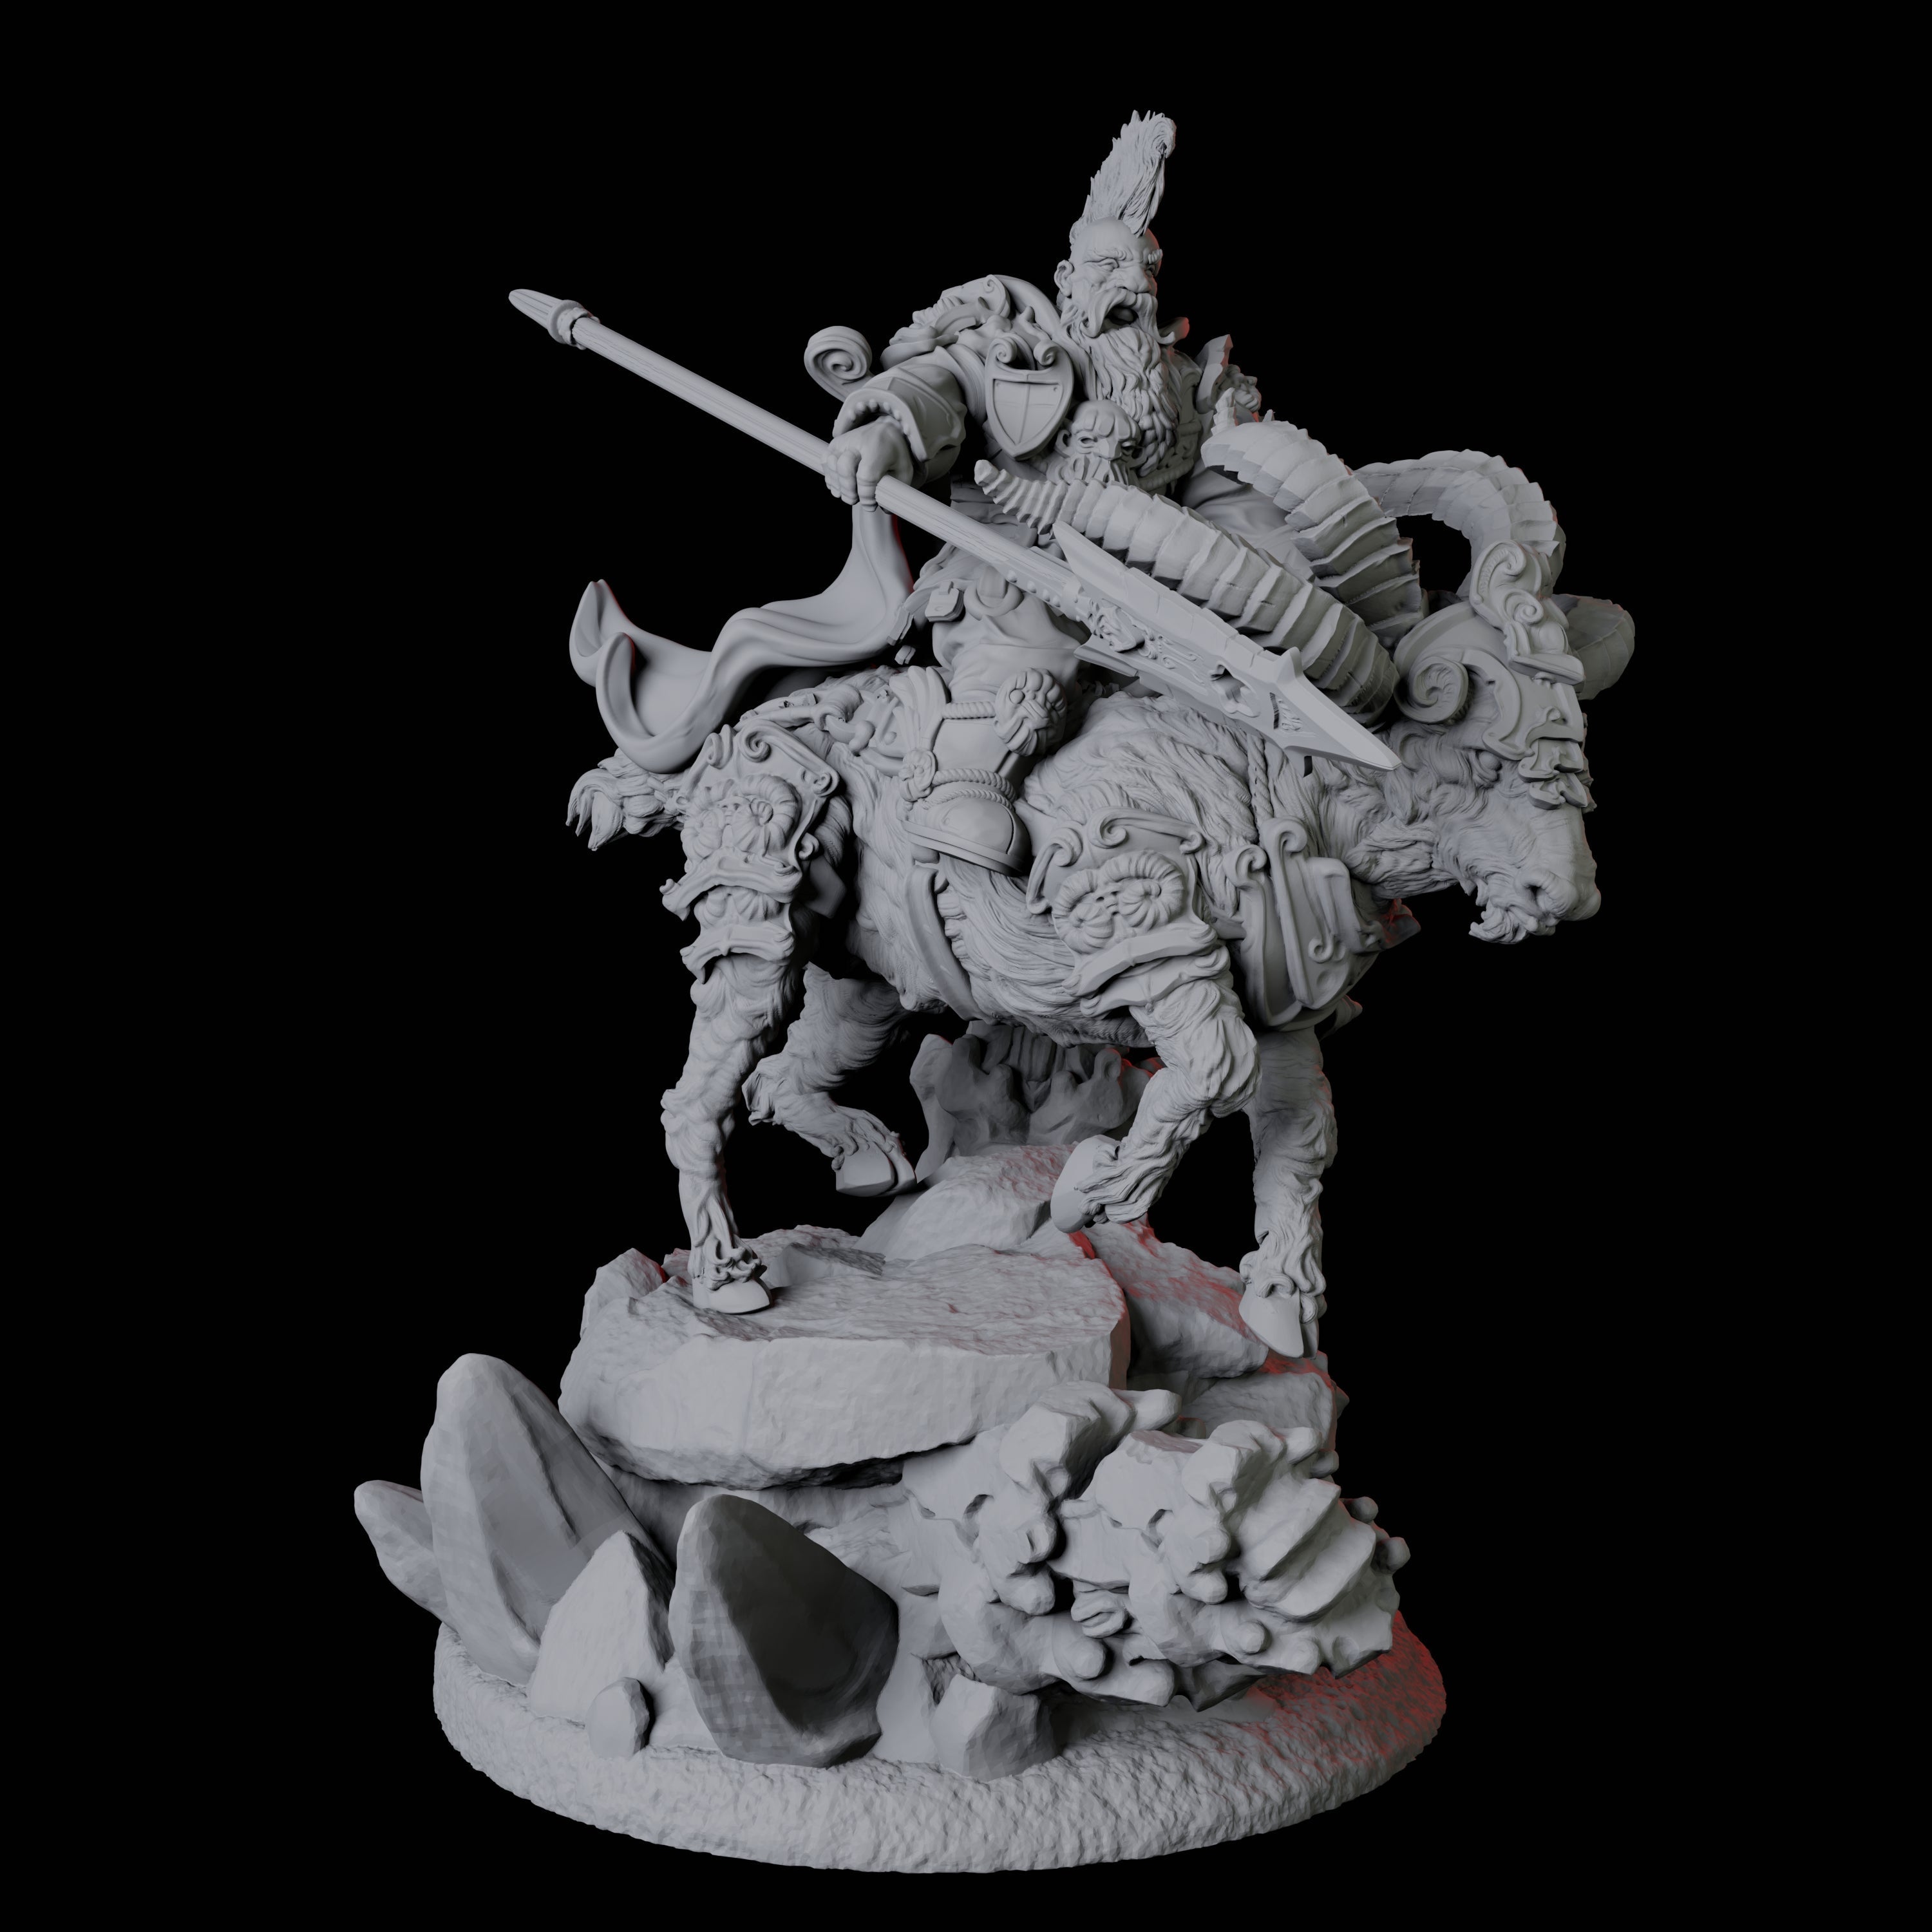 Four Goat Mounted Royal Guards Miniature for Dungeons and Dragons, Pathfinder or other TTRPGs